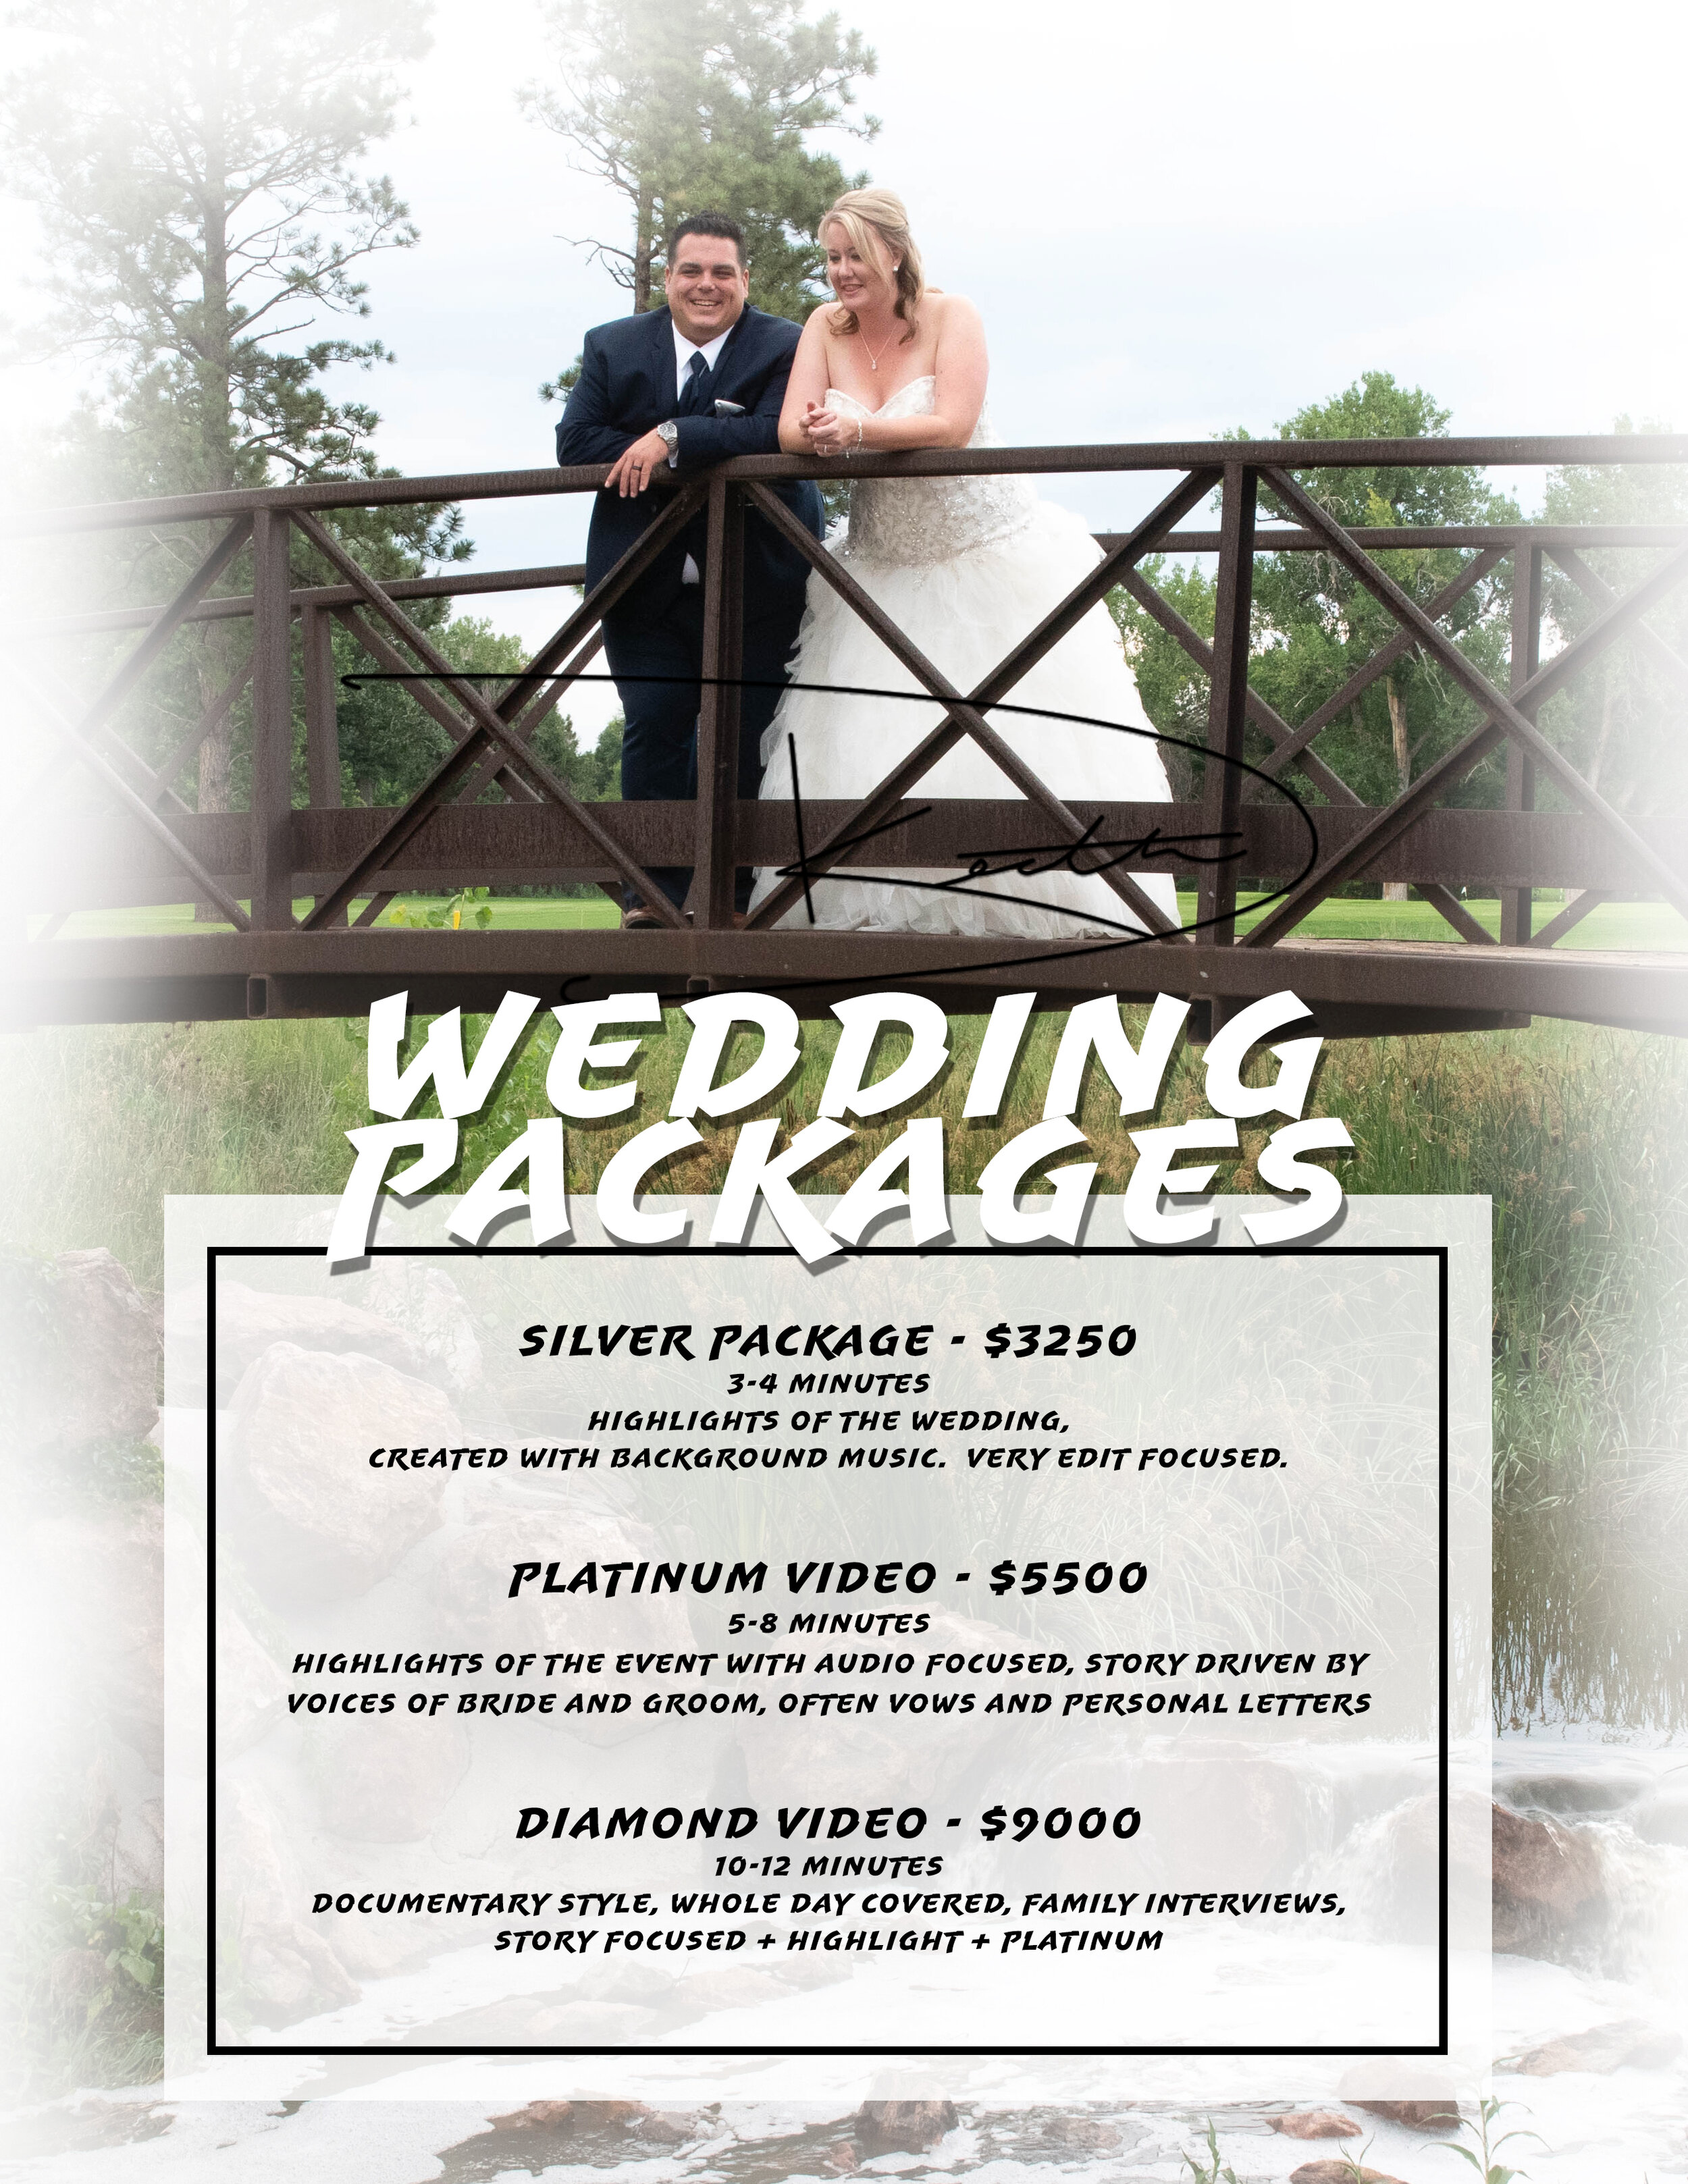 We offer multiple packages for Colorado wedding videography